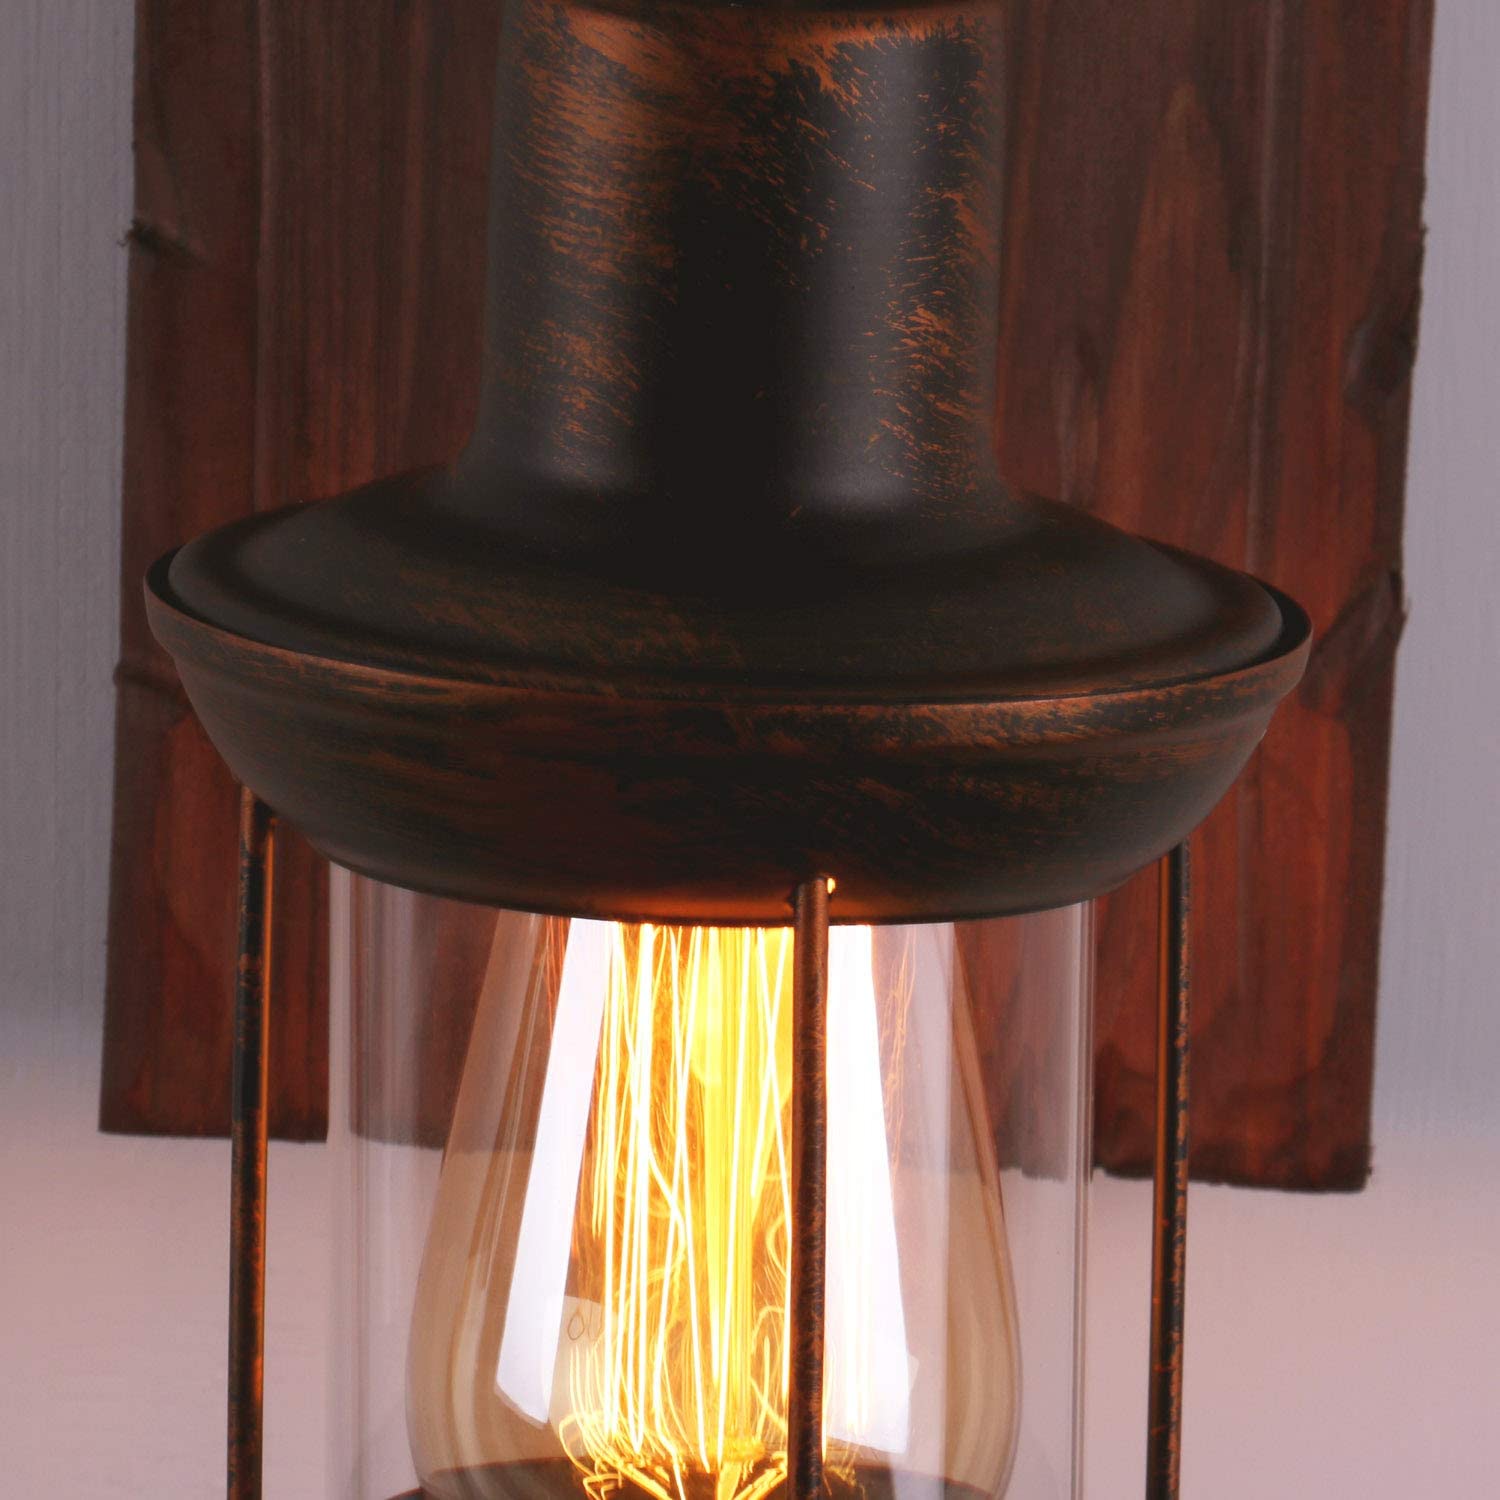 Industrial Retro Wooden Wall Sconces